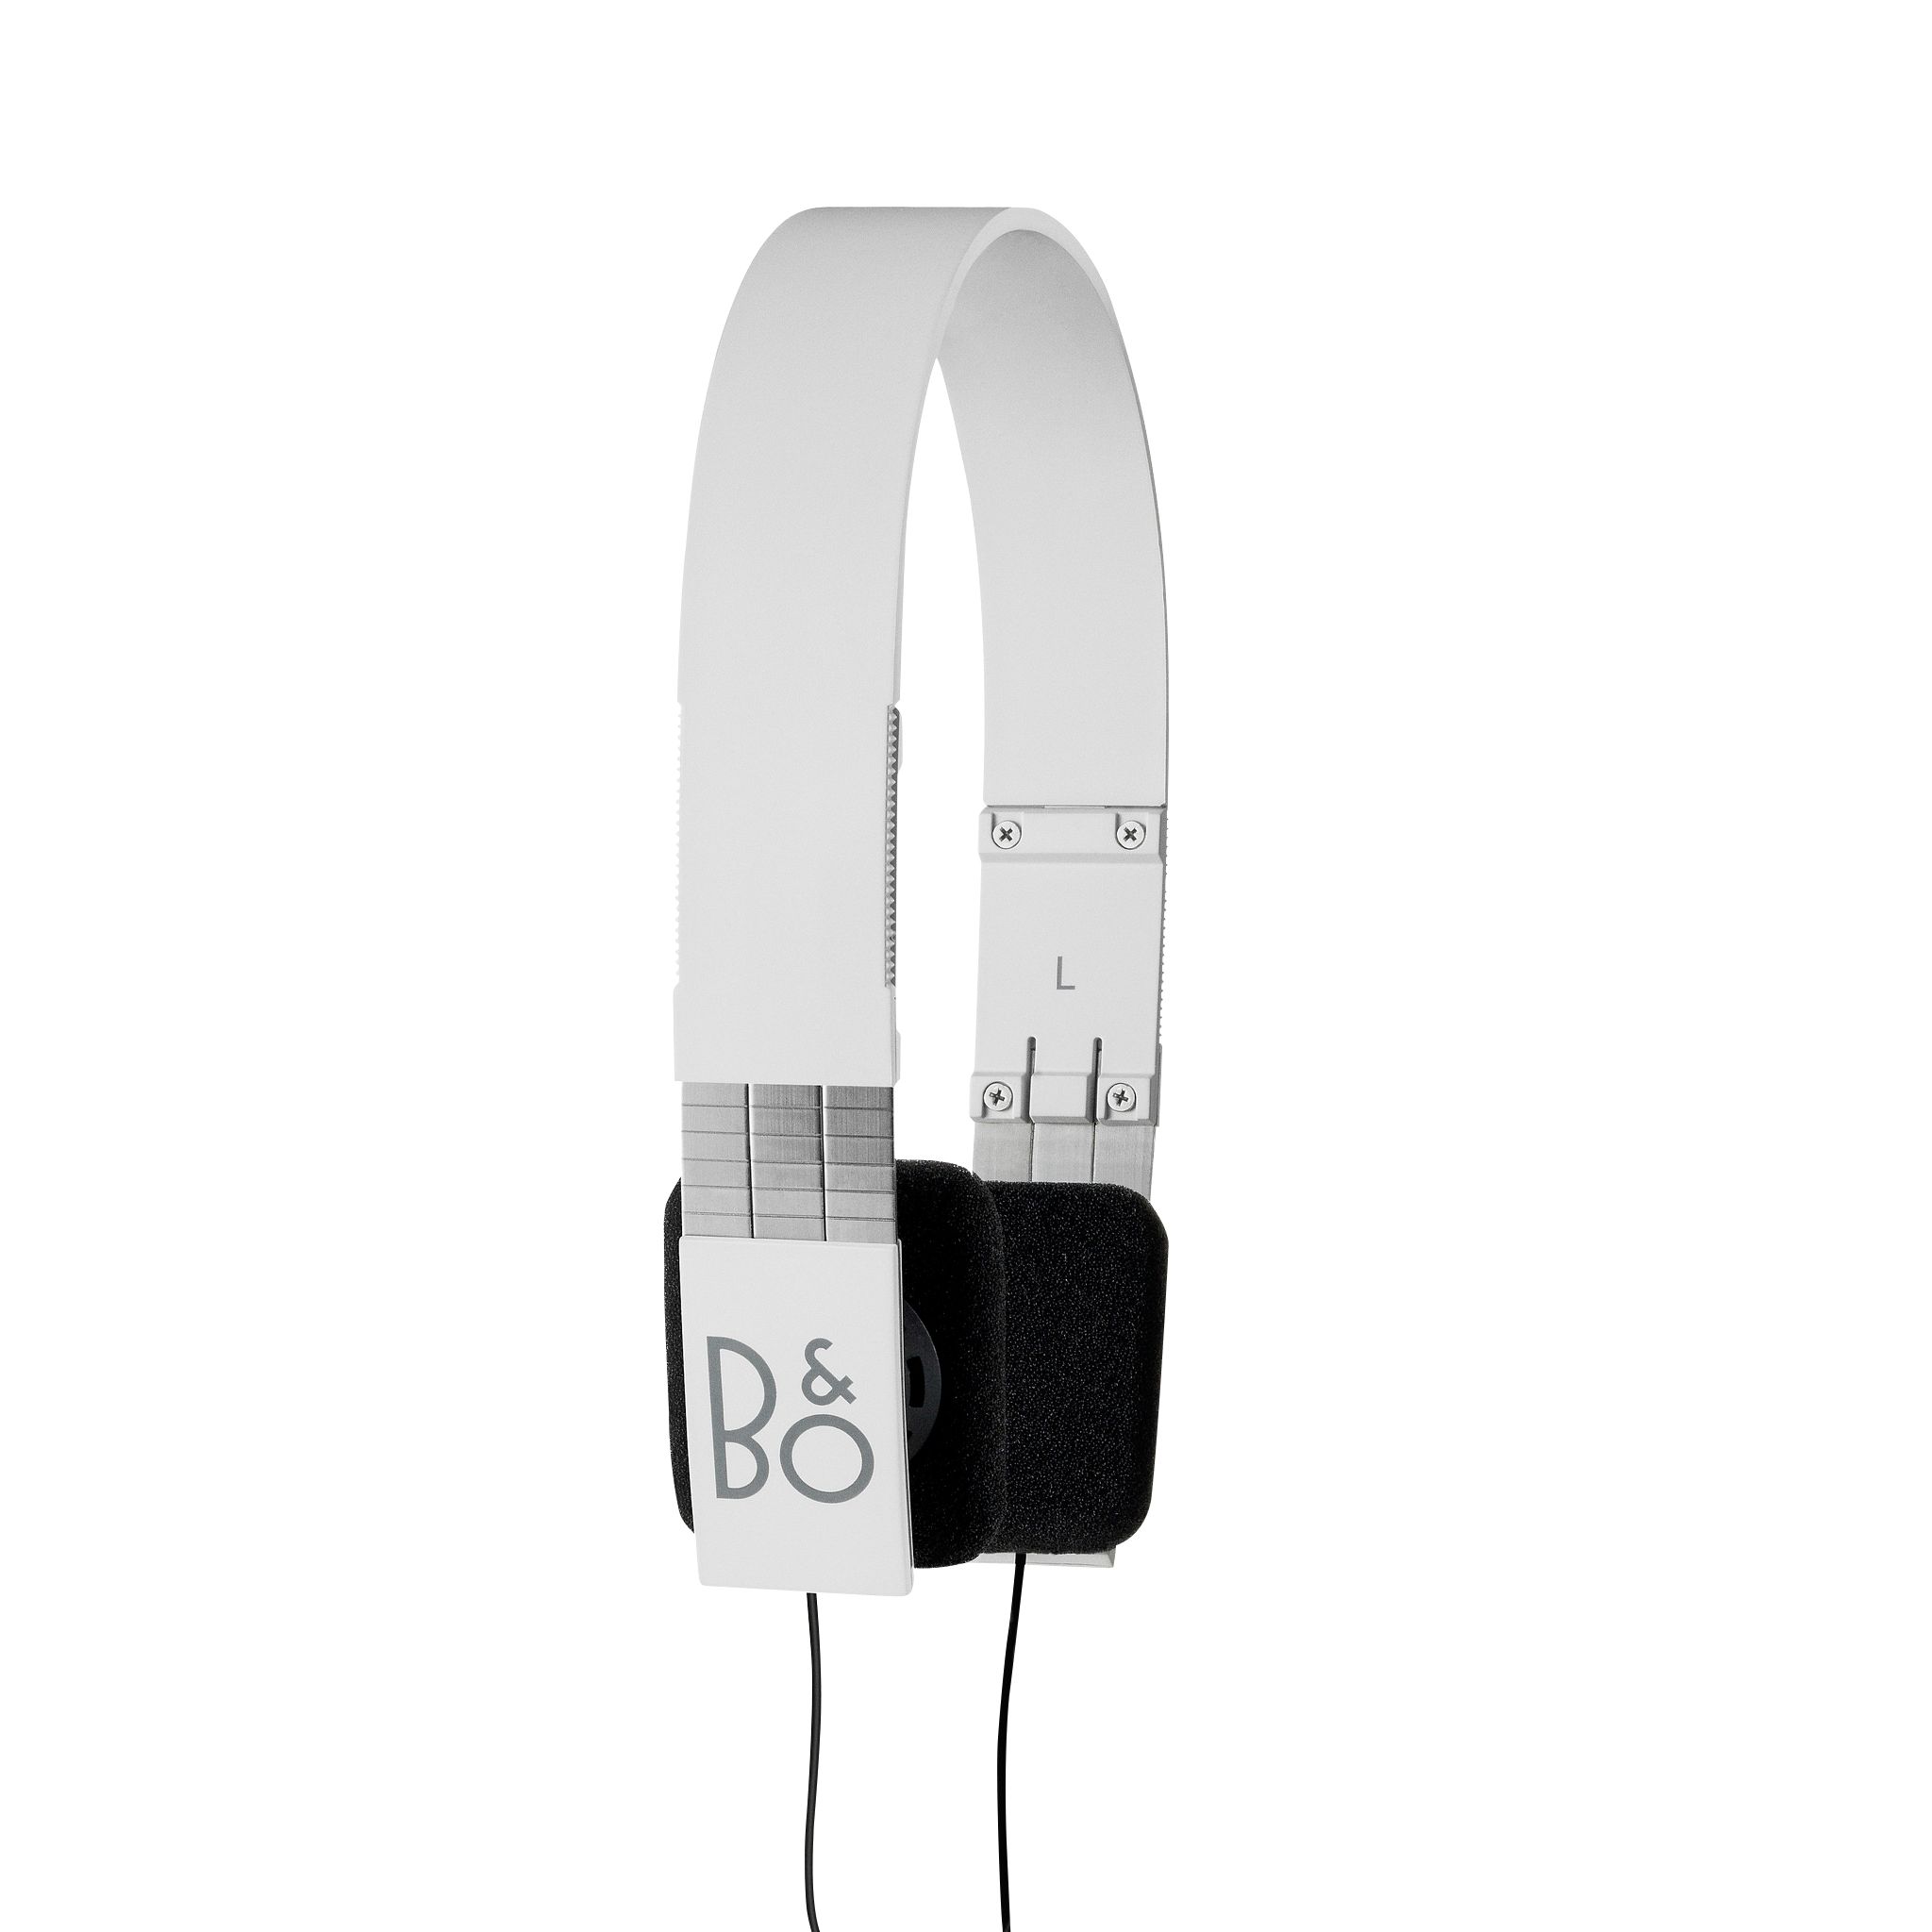 Bang & Olufsen Beoplay Form 2i On-Ear Headphones with Mic/Remote